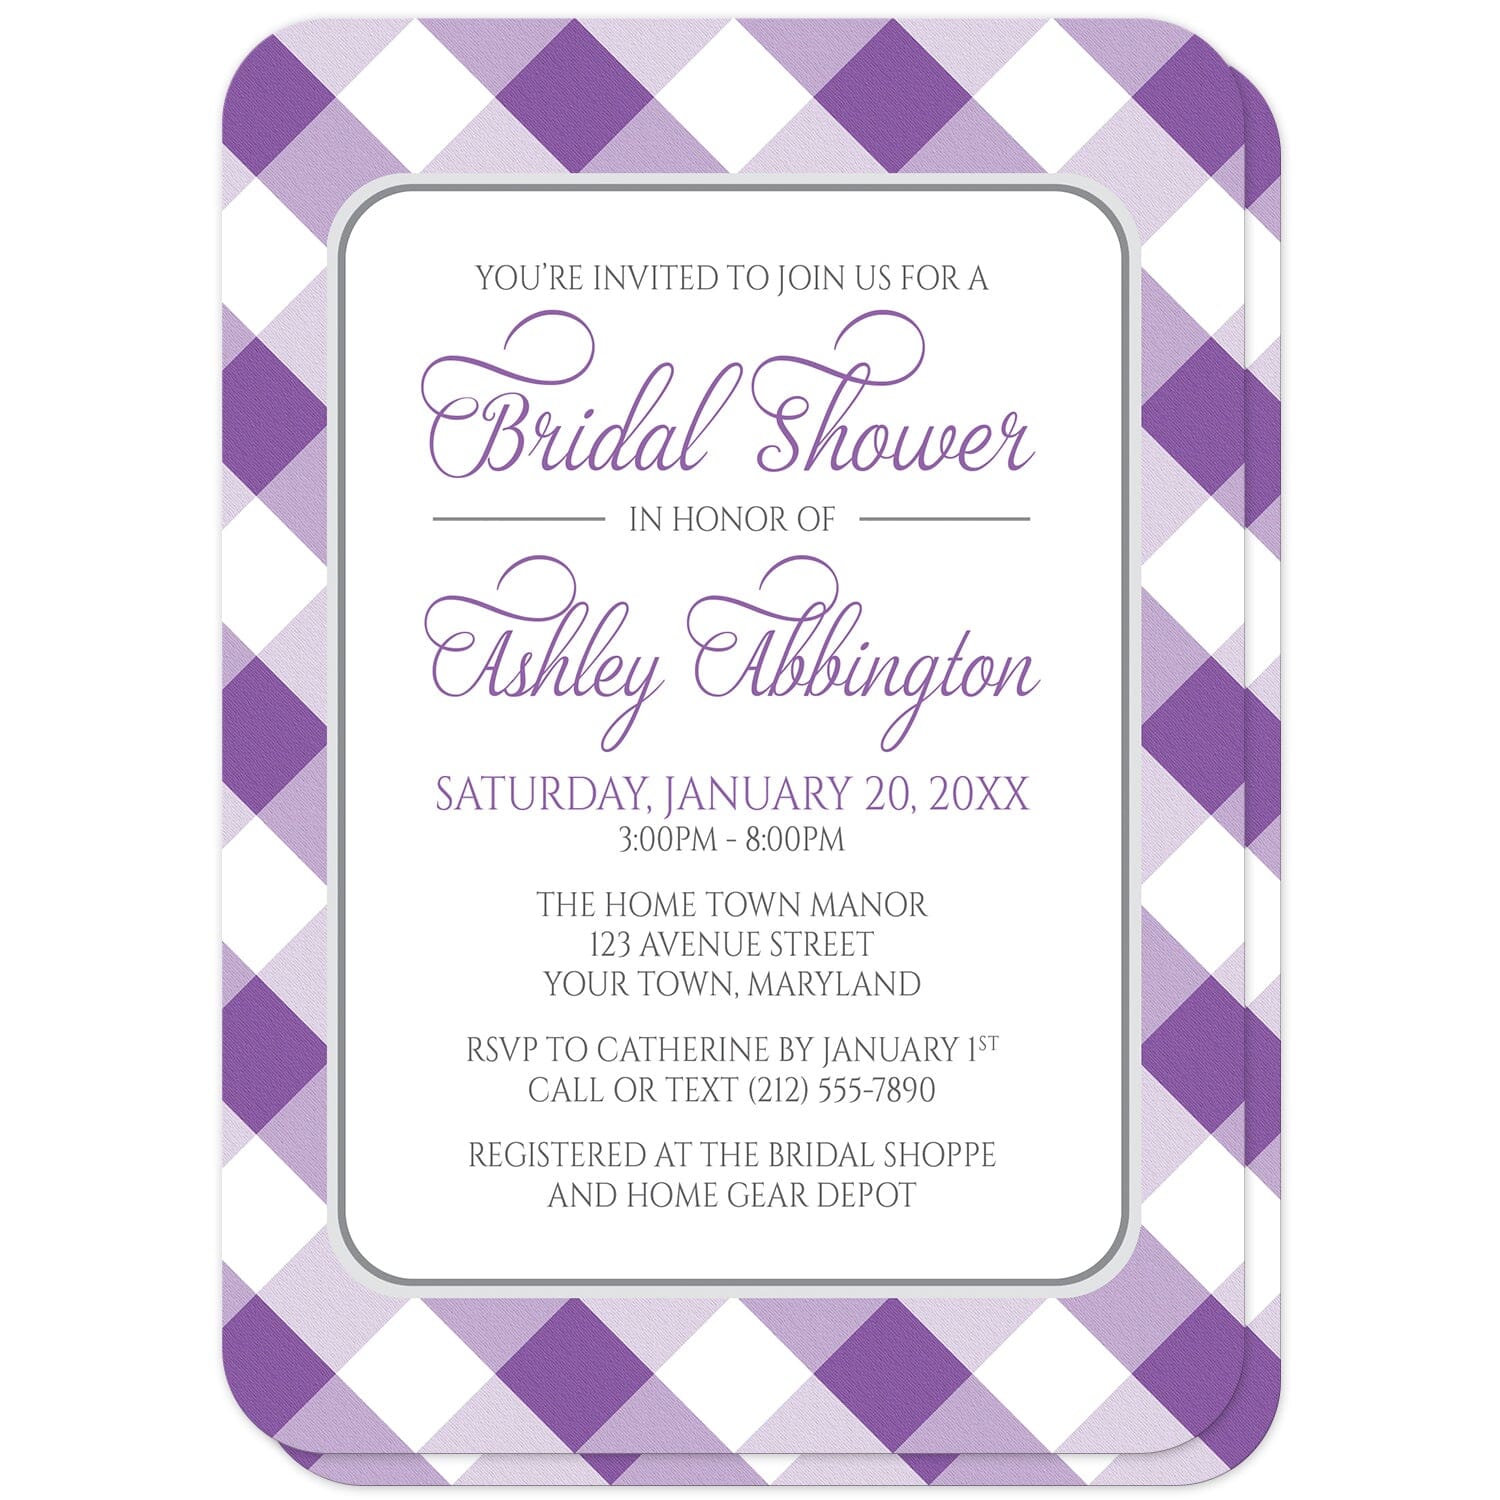 Purple Gingham Bridal Shower Invitations (with rounded corners) at Artistically Invited. Purple gingham bridal shower invitations with your personalized bridal shower celebration details custom printed in purple and gray inside a white rectangular area outlined in gray. The background design is a diagonal purple and white gingham pattern which is also printed on the back side of the invitations. 